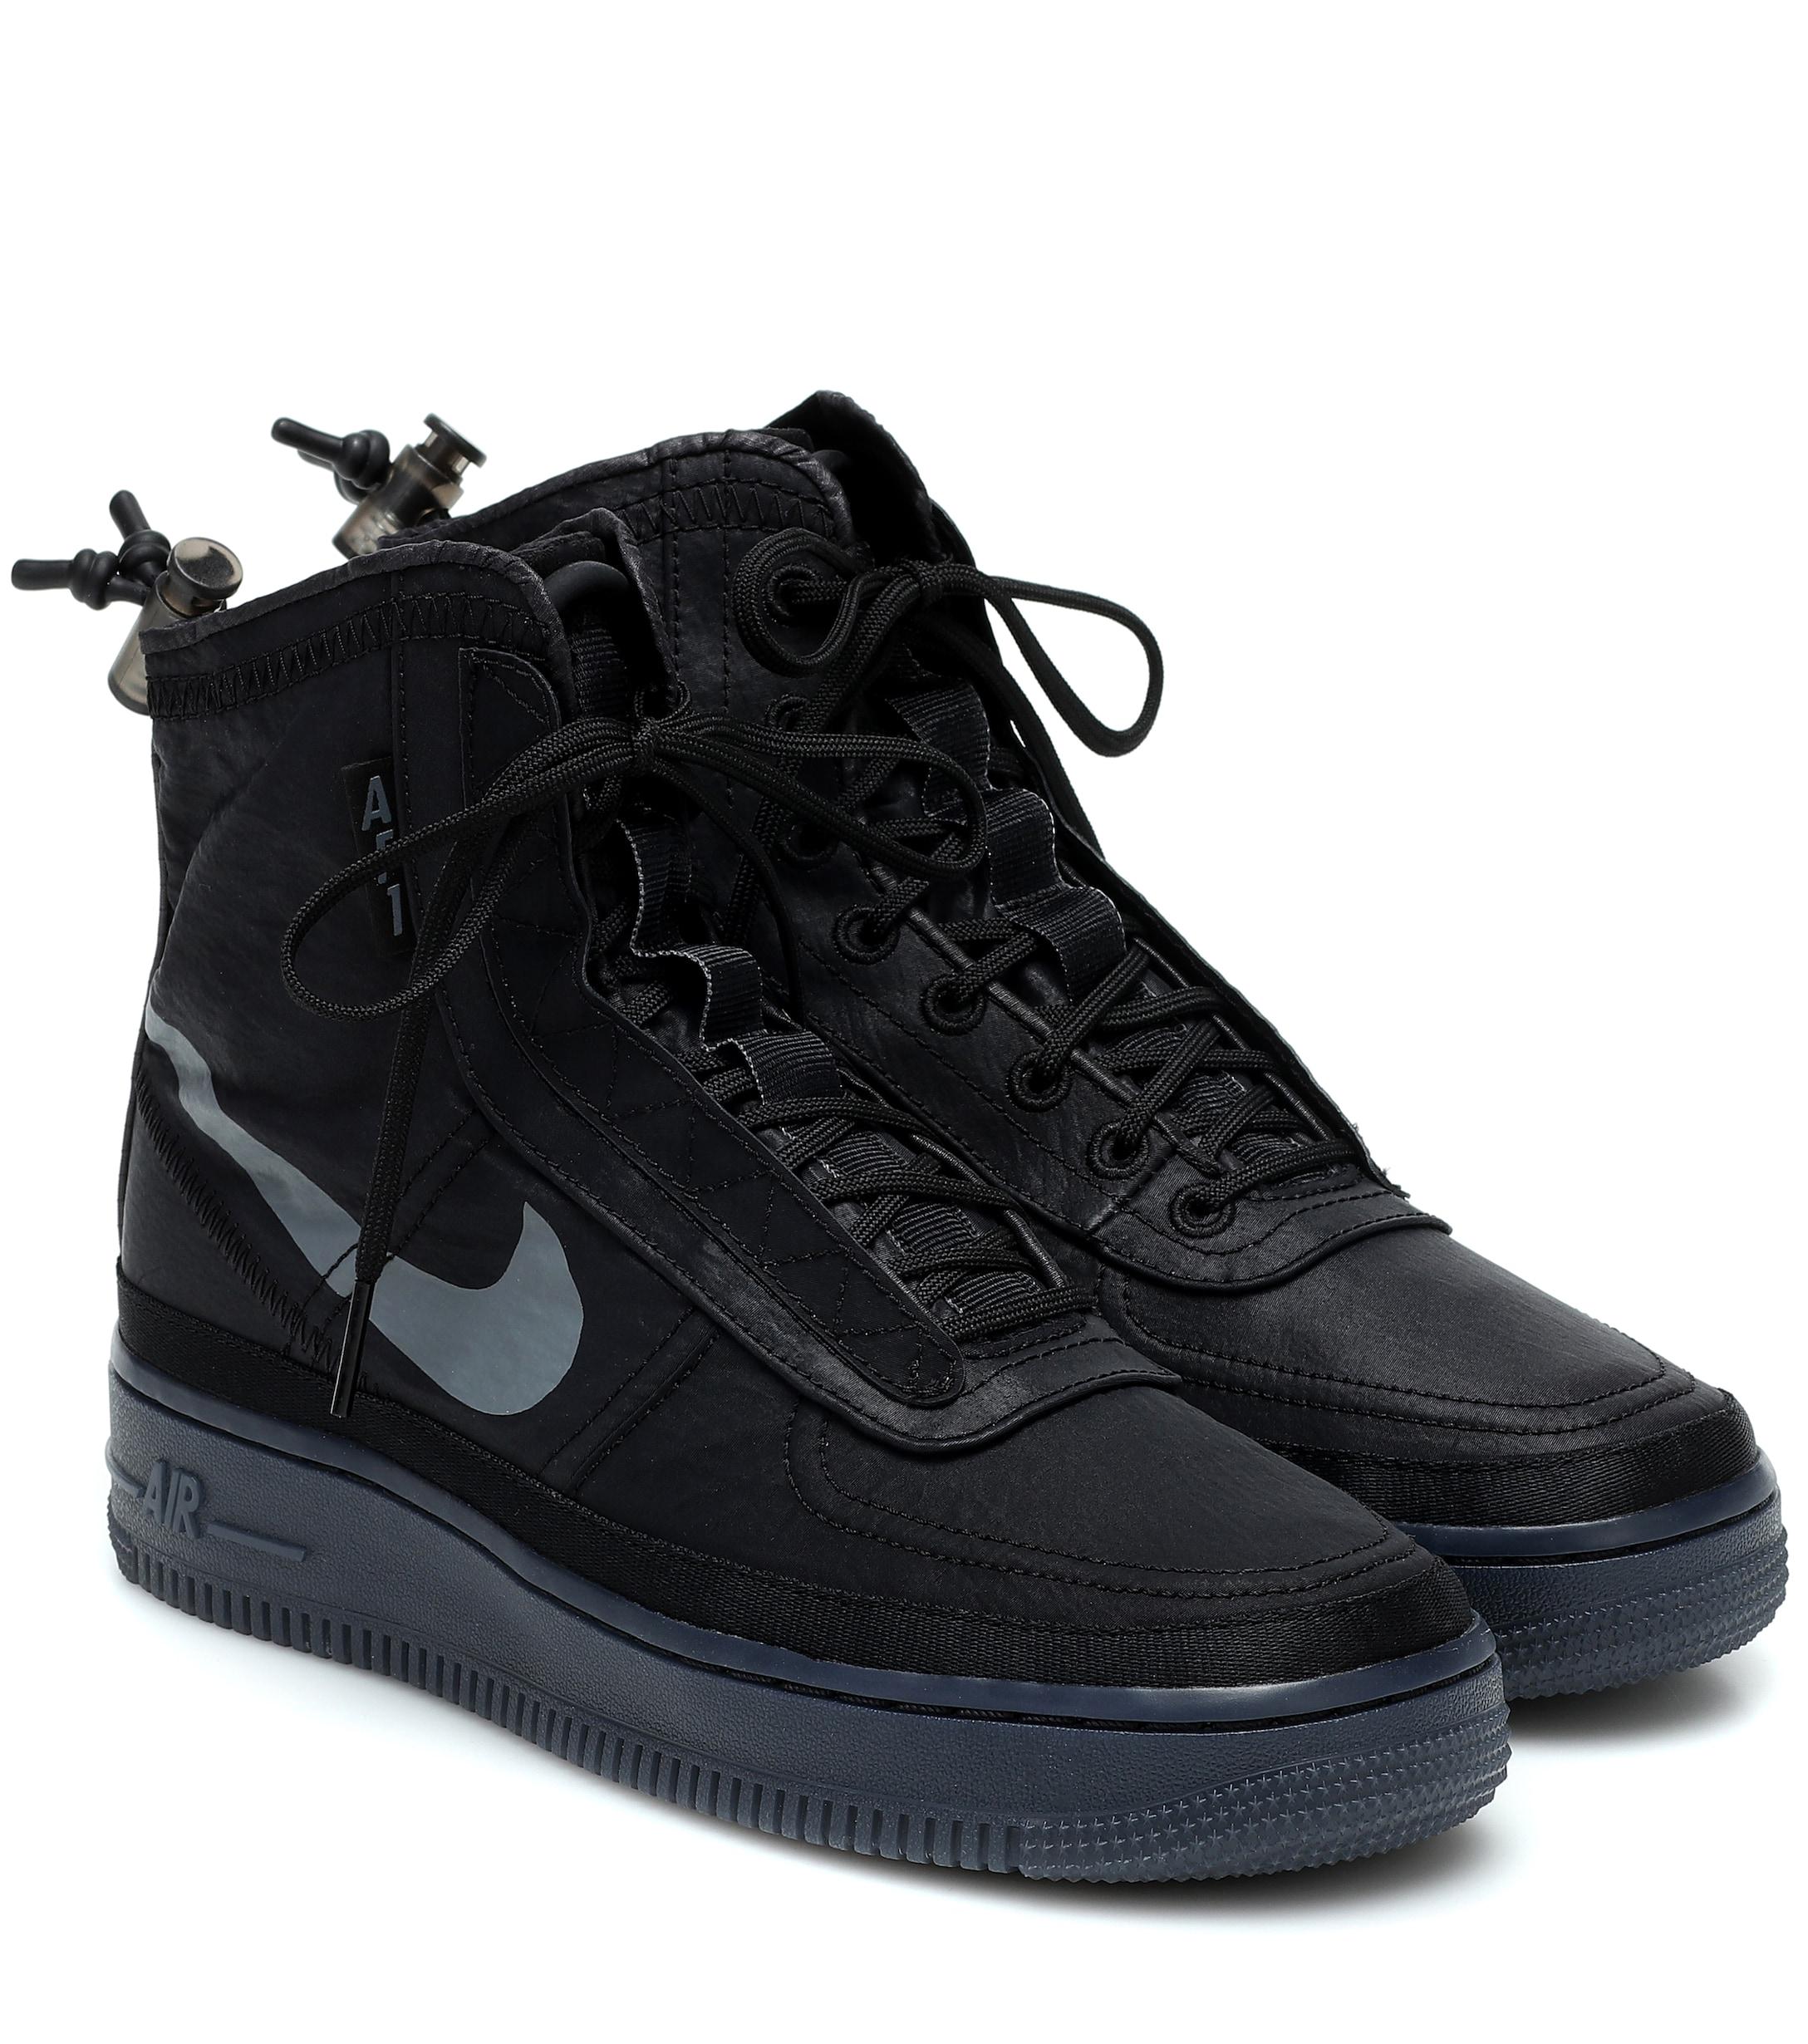 Nike Air Force 1 Shell Shoe in Black - Lyst